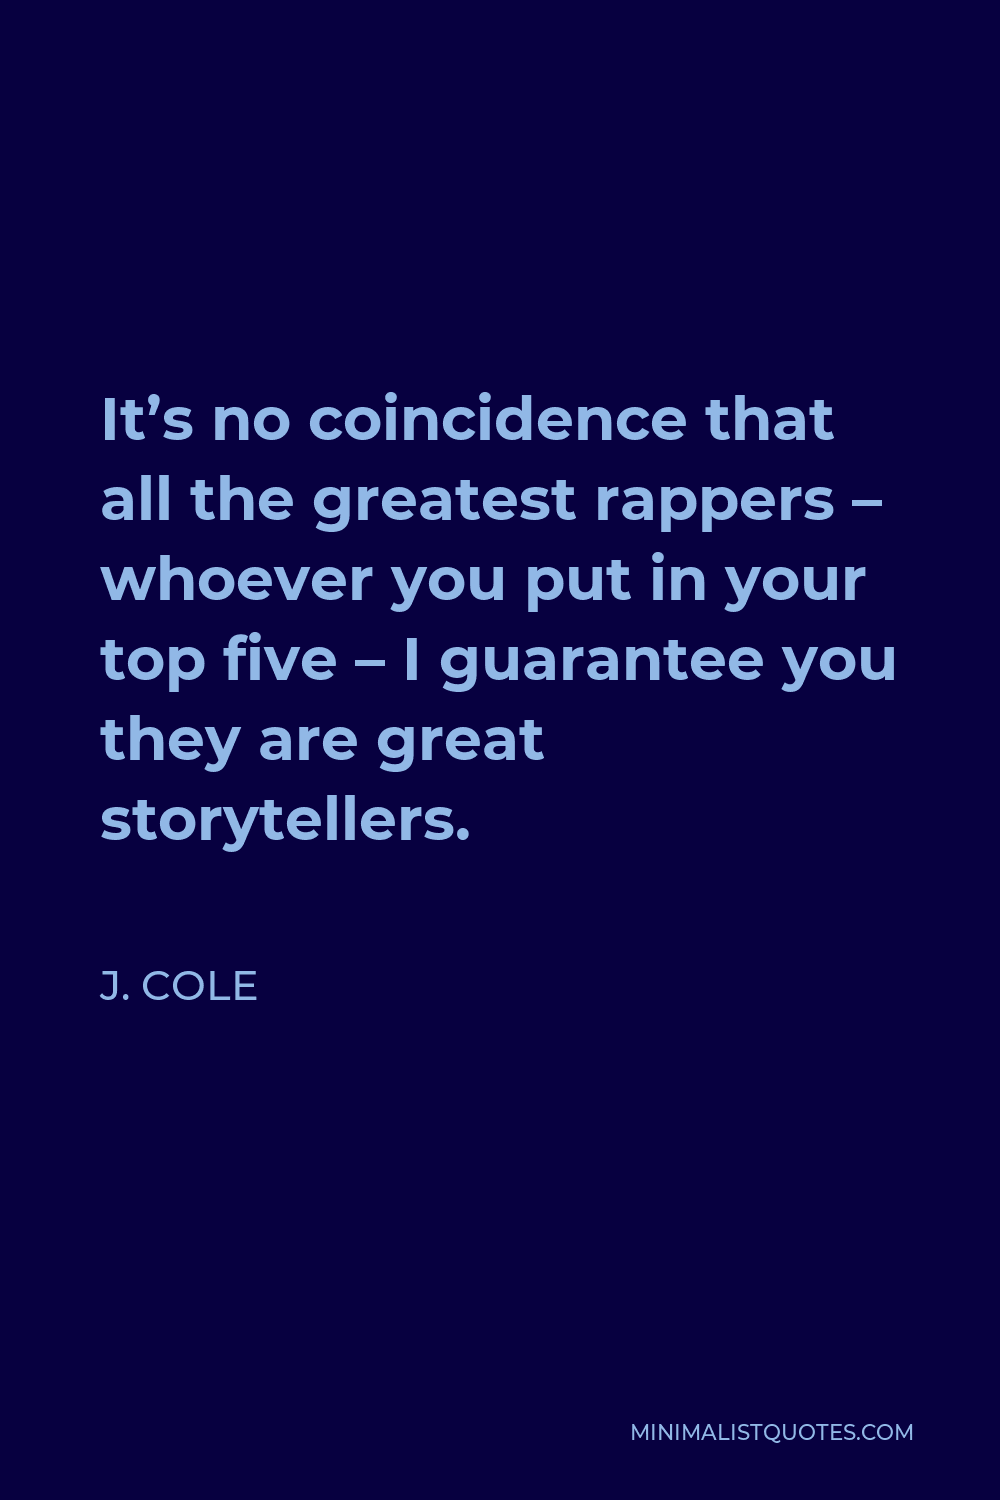 J. Cole Quote - It’s no coincidence that all the greatest rappers – whoever you put in your top five – I guarantee you they are great storytellers.